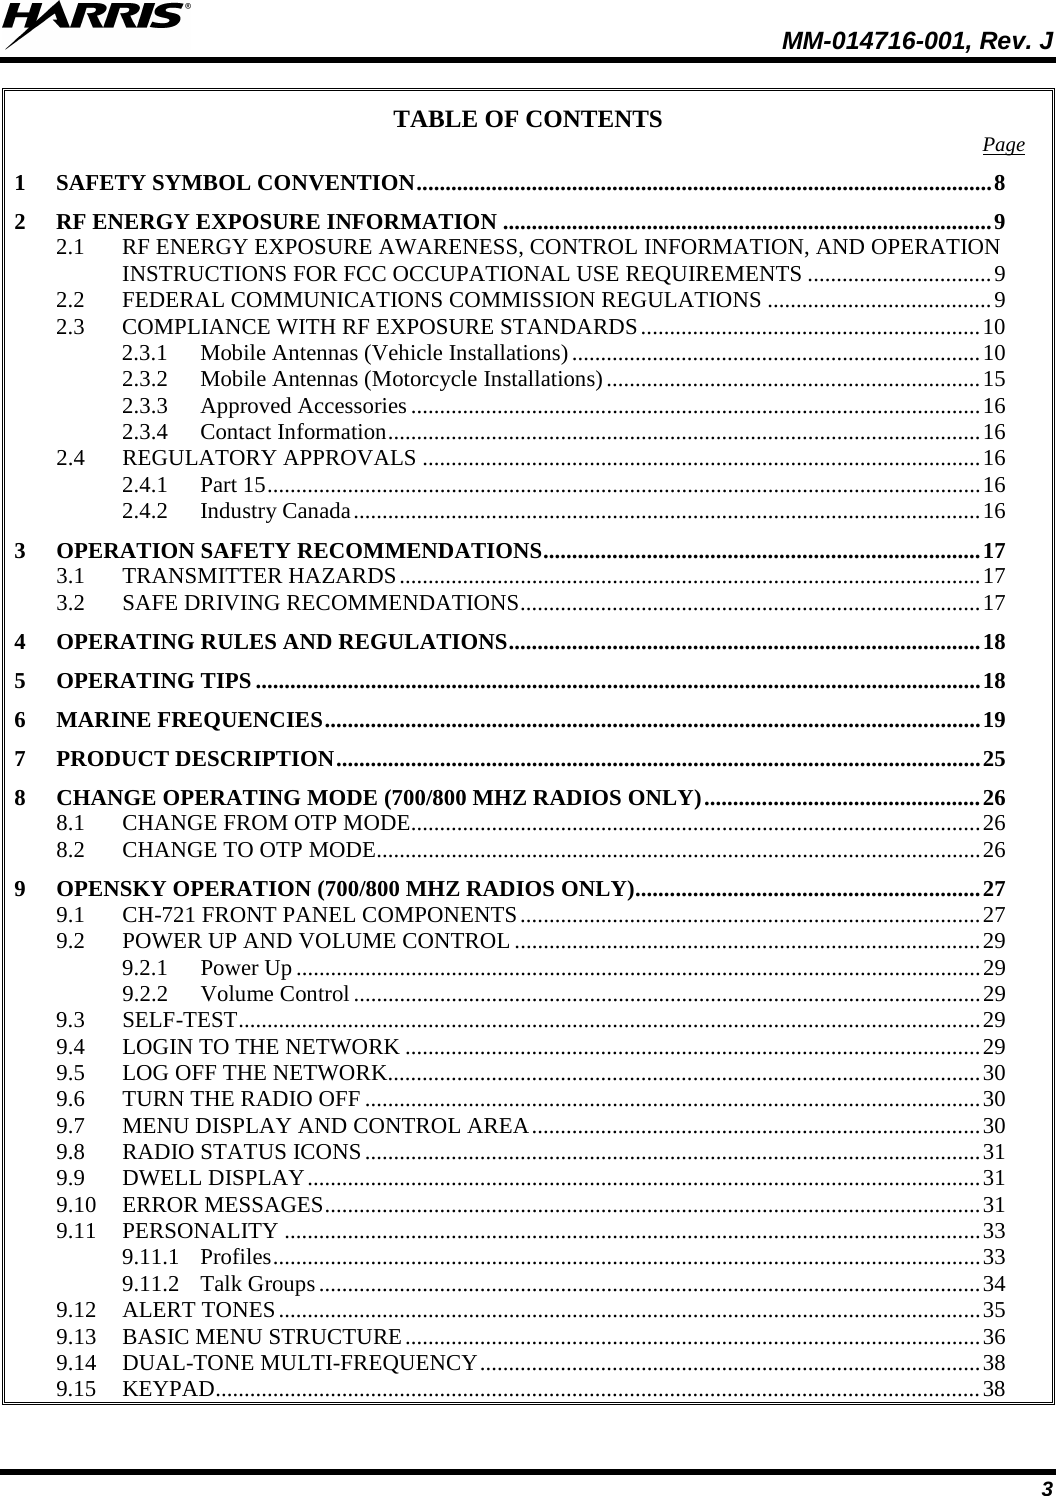  MM-014716-001, Rev. J 3 TABLE OF CONTENTS Page 1 SAFETY SYMBOL CONVENTION .................................................................................................... 8 2 RF ENERGY EXPOSURE INFORMATION ..................................................................................... 9 2.1 RF ENERGY EXPOSURE AWARENESS, CONTROL INFORMATION, AND OPERATION INSTRUCTIONS FOR FCC OCCUPATIONAL USE REQUIREMENTS ................................ 9 2.2 FEDERAL COMMUNICATIONS COMMISSION REGULATIONS ....................................... 9 2.3 COMPLIANCE WITH RF EXPOSURE STANDARDS ........................................................... 10 2.3.1 Mobile Antennas (Vehicle Installations) ....................................................................... 10 2.3.2 Mobile Antennas (Motorcycle Installations) ................................................................. 15 2.3.3 Approved Accessories ................................................................................................... 16 2.3.4 Contact Information ....................................................................................................... 16 2.4 REGULATORY APPROVALS ................................................................................................. 16 2.4.1 Part 15 ............................................................................................................................ 16 2.4.2 Industry Canada ............................................................................................................. 16 3 OPERATION SAFETY RECOMMENDATIONS ............................................................................ 17 3.1 TRANSMITTER HAZARDS ..................................................................................................... 17 3.2 SAFE DRIVING RECOMMENDATIONS ................................................................................ 17 4 OPERATING RULES AND REGULATIONS .................................................................................. 18 5 OPERATING TIPS .............................................................................................................................. 18 6 MARINE FREQUENCIES .................................................................................................................. 19 7 PRODUCT DESCRIPTION ................................................................................................................ 25 8 CHANGE OPERATING MODE (700/800 MHZ RADIOS ONLY) ................................................ 26 8.1 CHANGE FROM OTP MODE ................................................................................................... 26 8.2 CHANGE TO OTP MODE......................................................................................................... 26 9 OPENSKY OPERATION (700/800 MHZ RADIOS ONLY) ............................................................ 27 9.1 CH-721 FRONT PANEL COMPONENTS ................................................................................ 27 9.2 POWER UP AND VOLUME CONTROL ................................................................................. 29 9.2.1 Power Up ....................................................................................................................... 29 9.2.2 Volume Control ............................................................................................................. 29 9.3 SELF-TEST ................................................................................................................................. 29 9.4 LOGIN TO THE NETWORK .................................................................................................... 29 9.5 LOG OFF THE NETWORK....................................................................................................... 30 9.6 TURN THE RADIO OFF ........................................................................................................... 30 9.7 MENU DISPLAY AND CONTROL AREA .............................................................................. 30 9.8 RADIO STATUS ICONS ........................................................................................................... 31 9.9 DWELL DISPLAY ..................................................................................................................... 31 9.10 ERROR MESSAGES .................................................................................................................. 31 9.11 PERSONALITY ......................................................................................................................... 33 9.11.1 Profiles ........................................................................................................................... 33 9.11.2 Talk Groups ................................................................................................................... 34 9.12 ALERT TONES .......................................................................................................................... 35 9.13 BASIC MENU STRUCTURE .................................................................................................... 36 9.14 DUAL-TONE MULTI-FREQUENCY ....................................................................................... 38 9.15 KEYPAD..................................................................................................................................... 38 